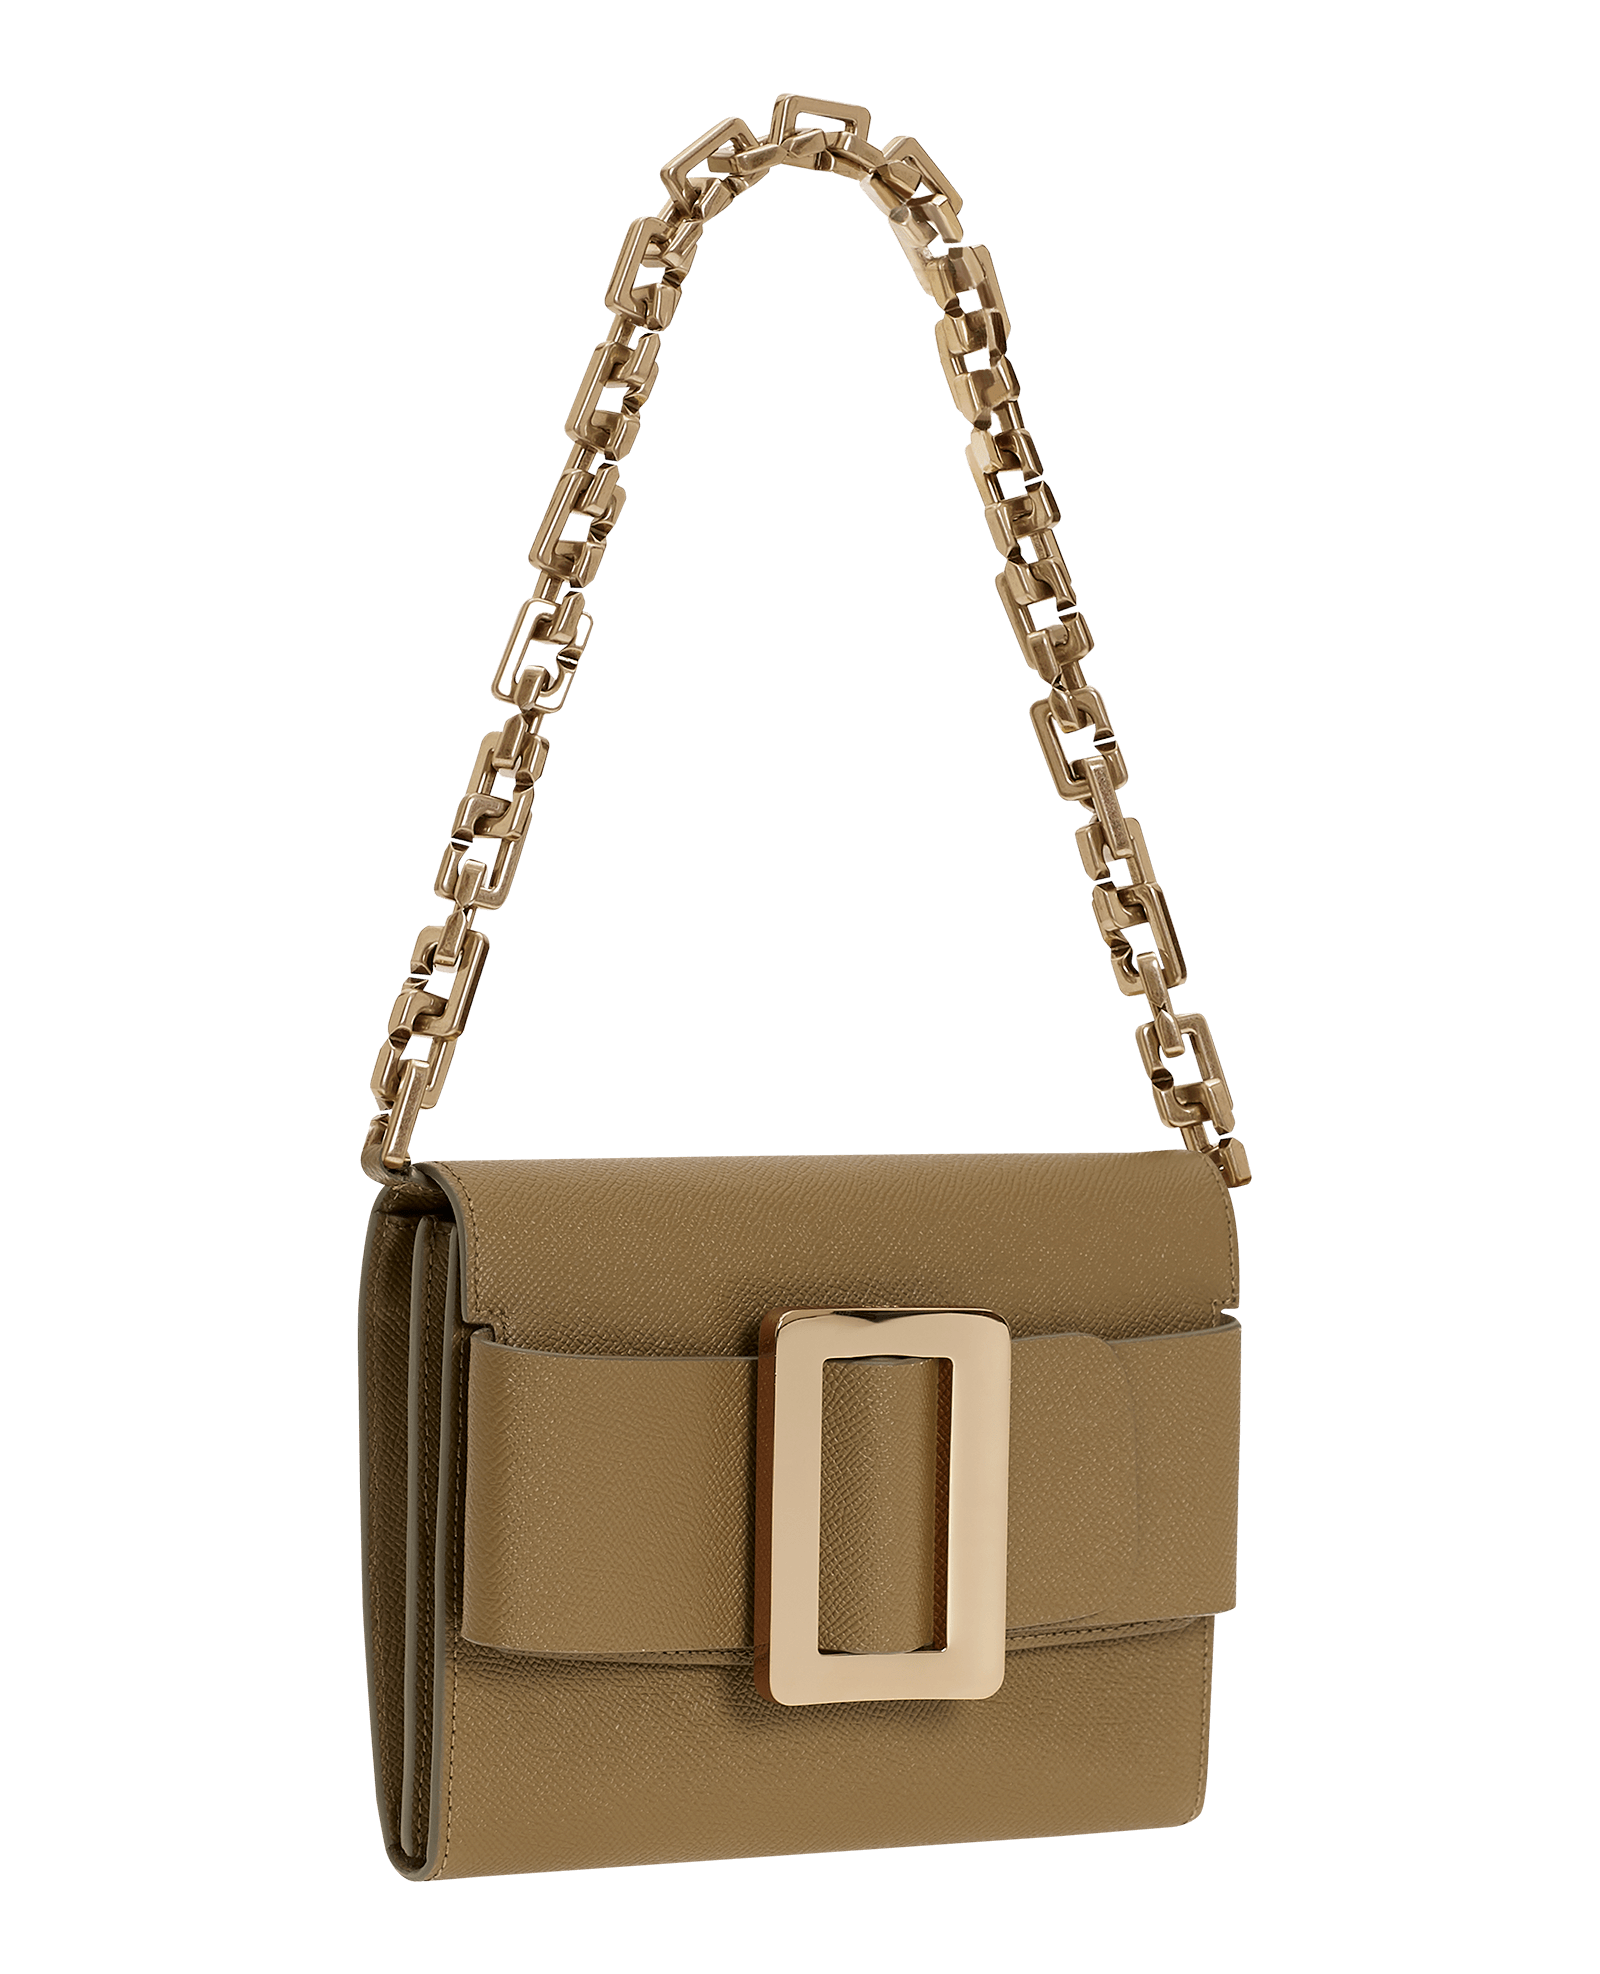 Rectangular clutch purse in grained brown leather with oversized gold buckle, leather belt, front flap closure, and metal chain carrying strap.